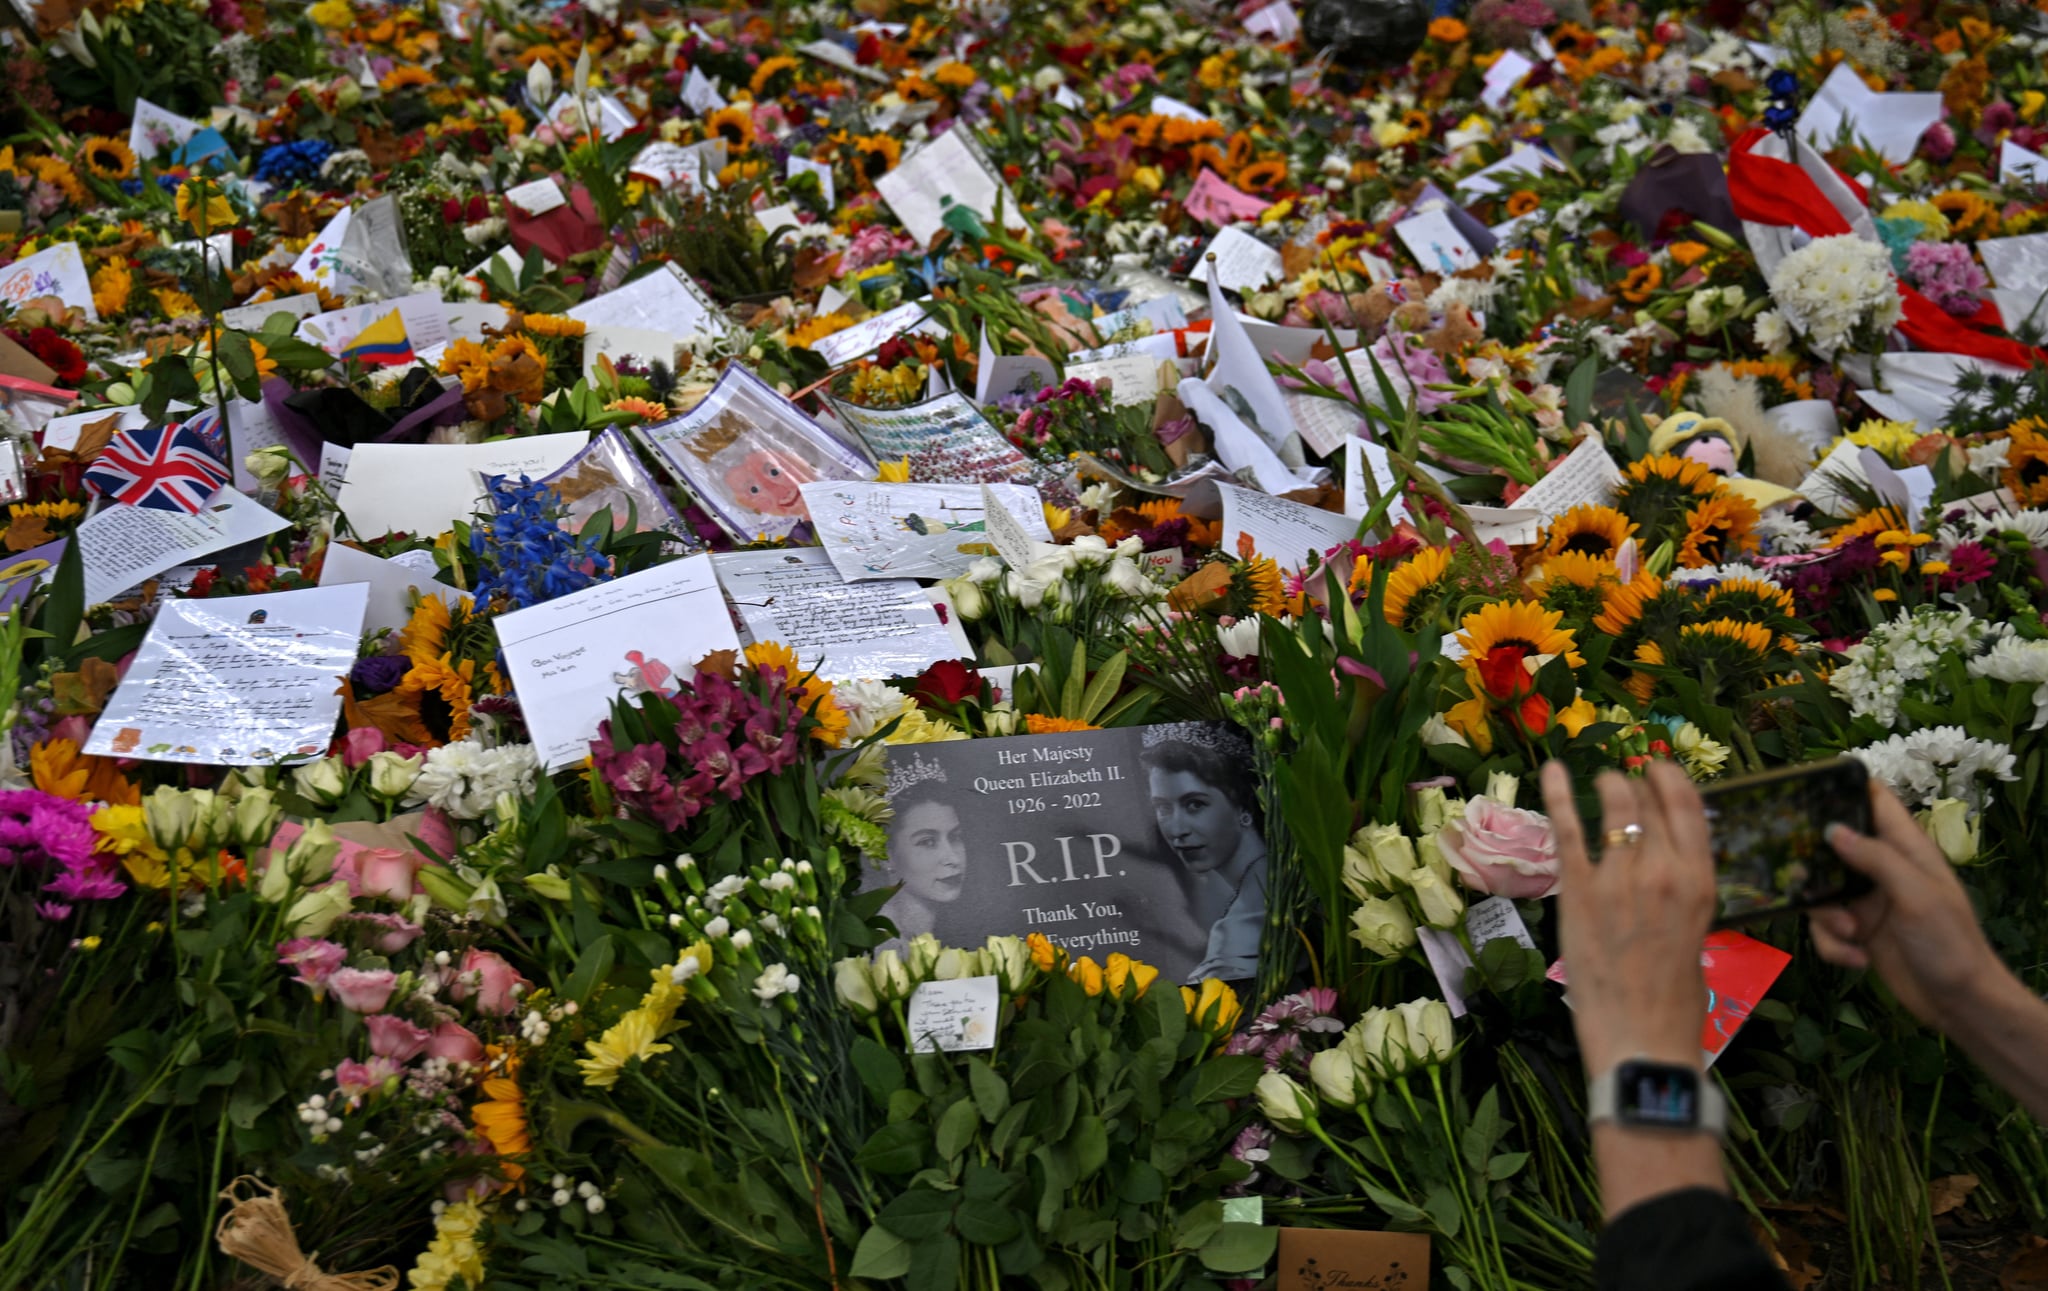 Members of the public look at flowers and tributes left in Green Park in London on September 13, 2022, following the death of Queen Elizabeth II on September 8. - Queen Elizabeth II's coffin will on Tuesday be flown by the Royal Air Force from Edinburgh to London, accompanied by the queen's only daughter Anne, the Princess Royal, and driven to Buckingham Palace, to rest in the Bow Room. (Photo by CARL DE SOUZA / AFP) (Photo by CARL DE SOUZA/AFP via Getty Images)